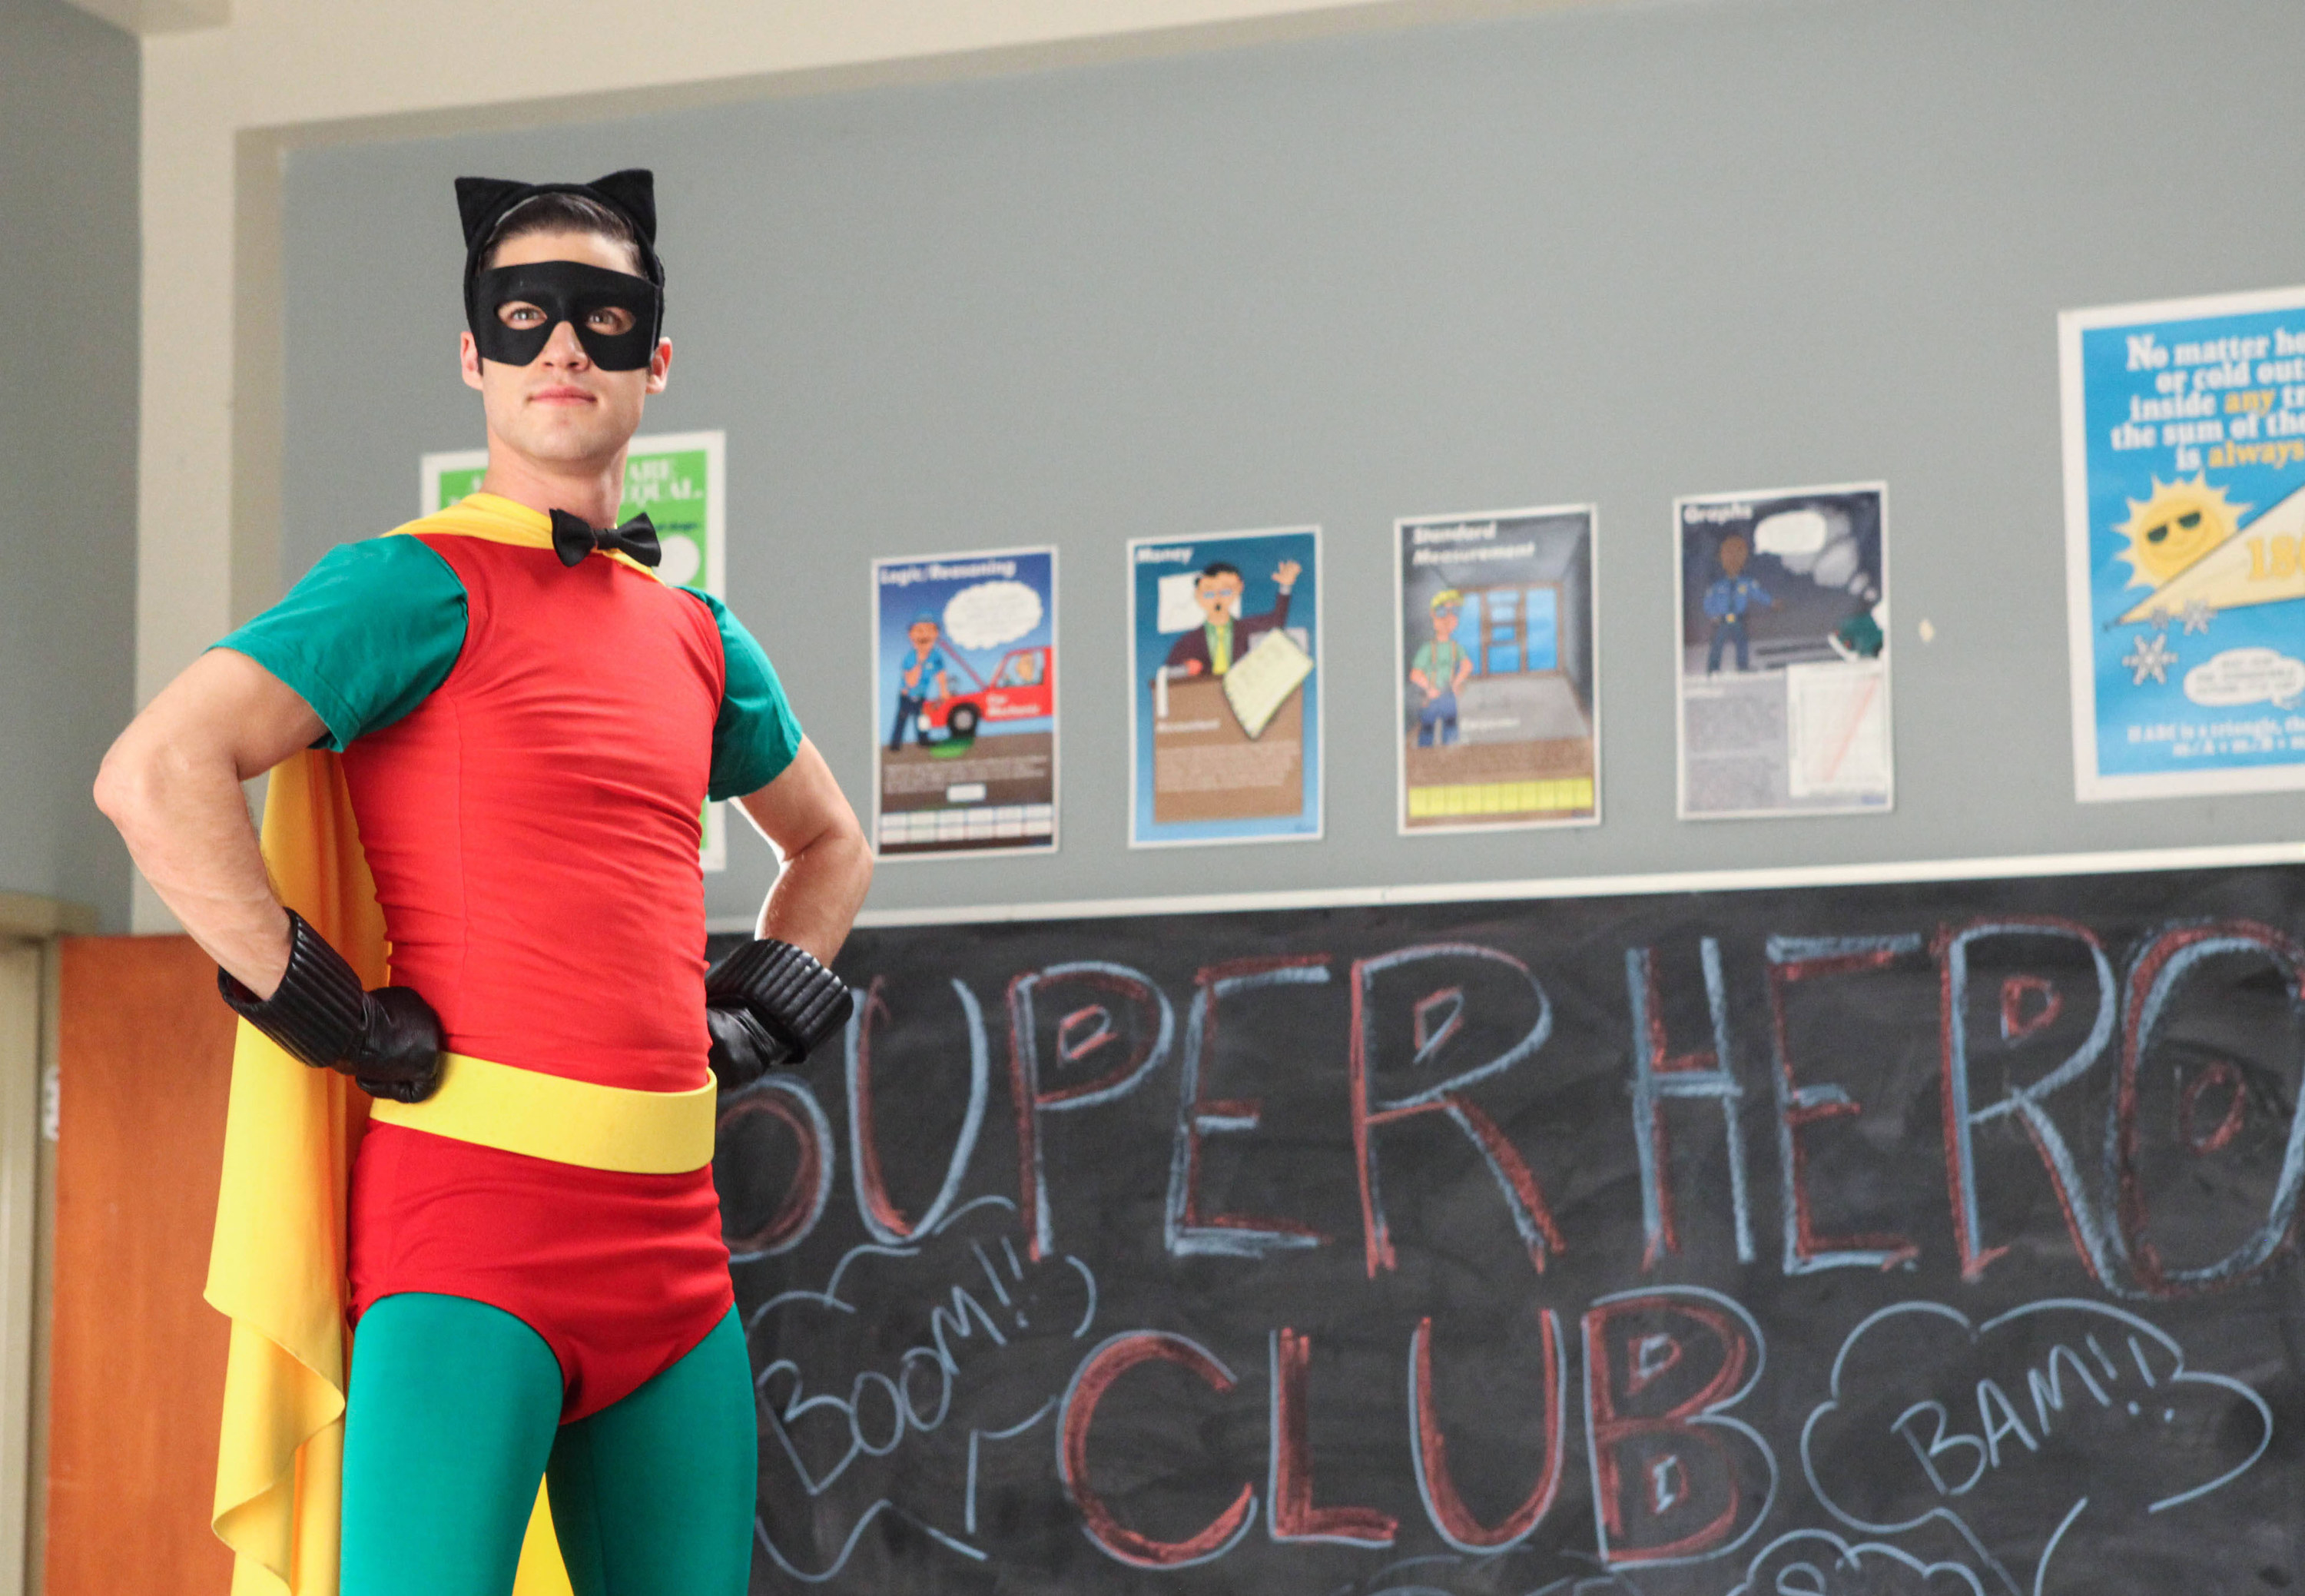 Criss dressed up as Robin in front of a chalkboard that says &quot;Superhero Club&quot; on it